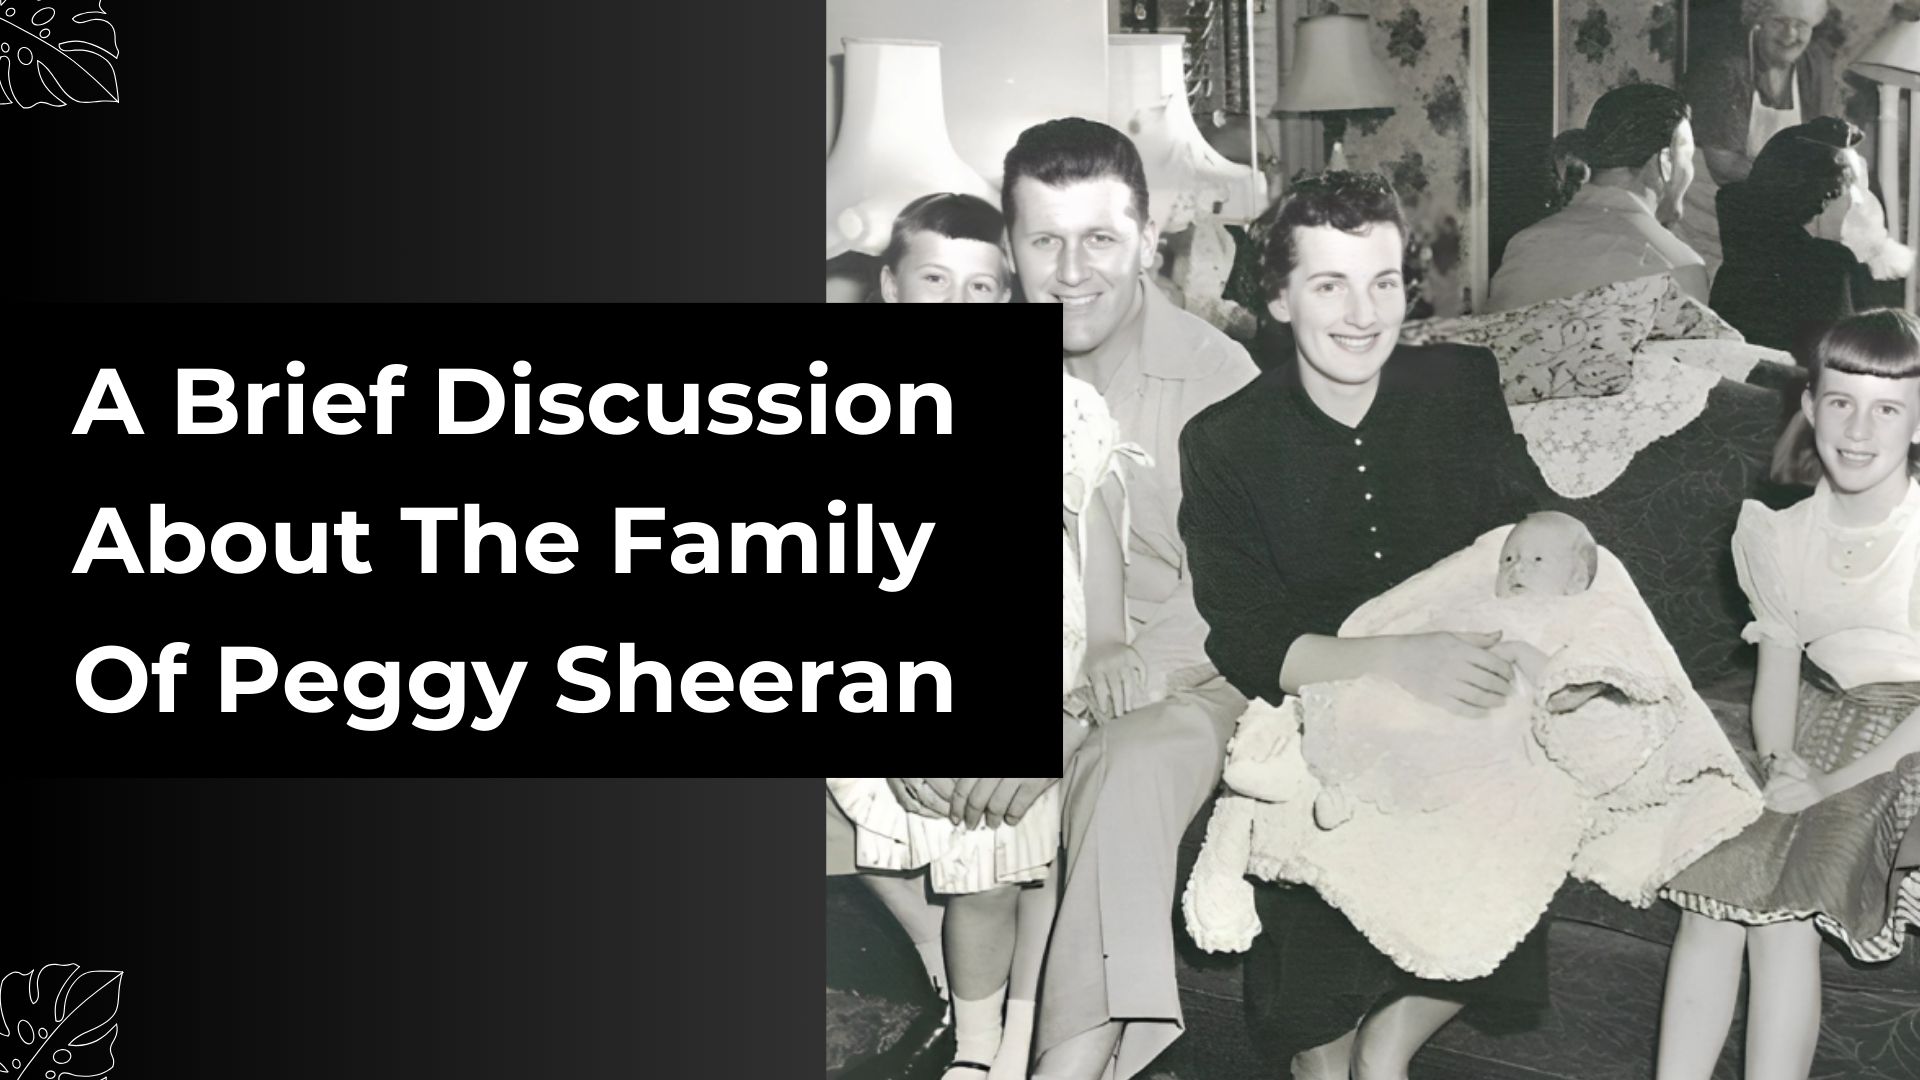 A Brief Discussion About The Family Of Peggy Sheeran